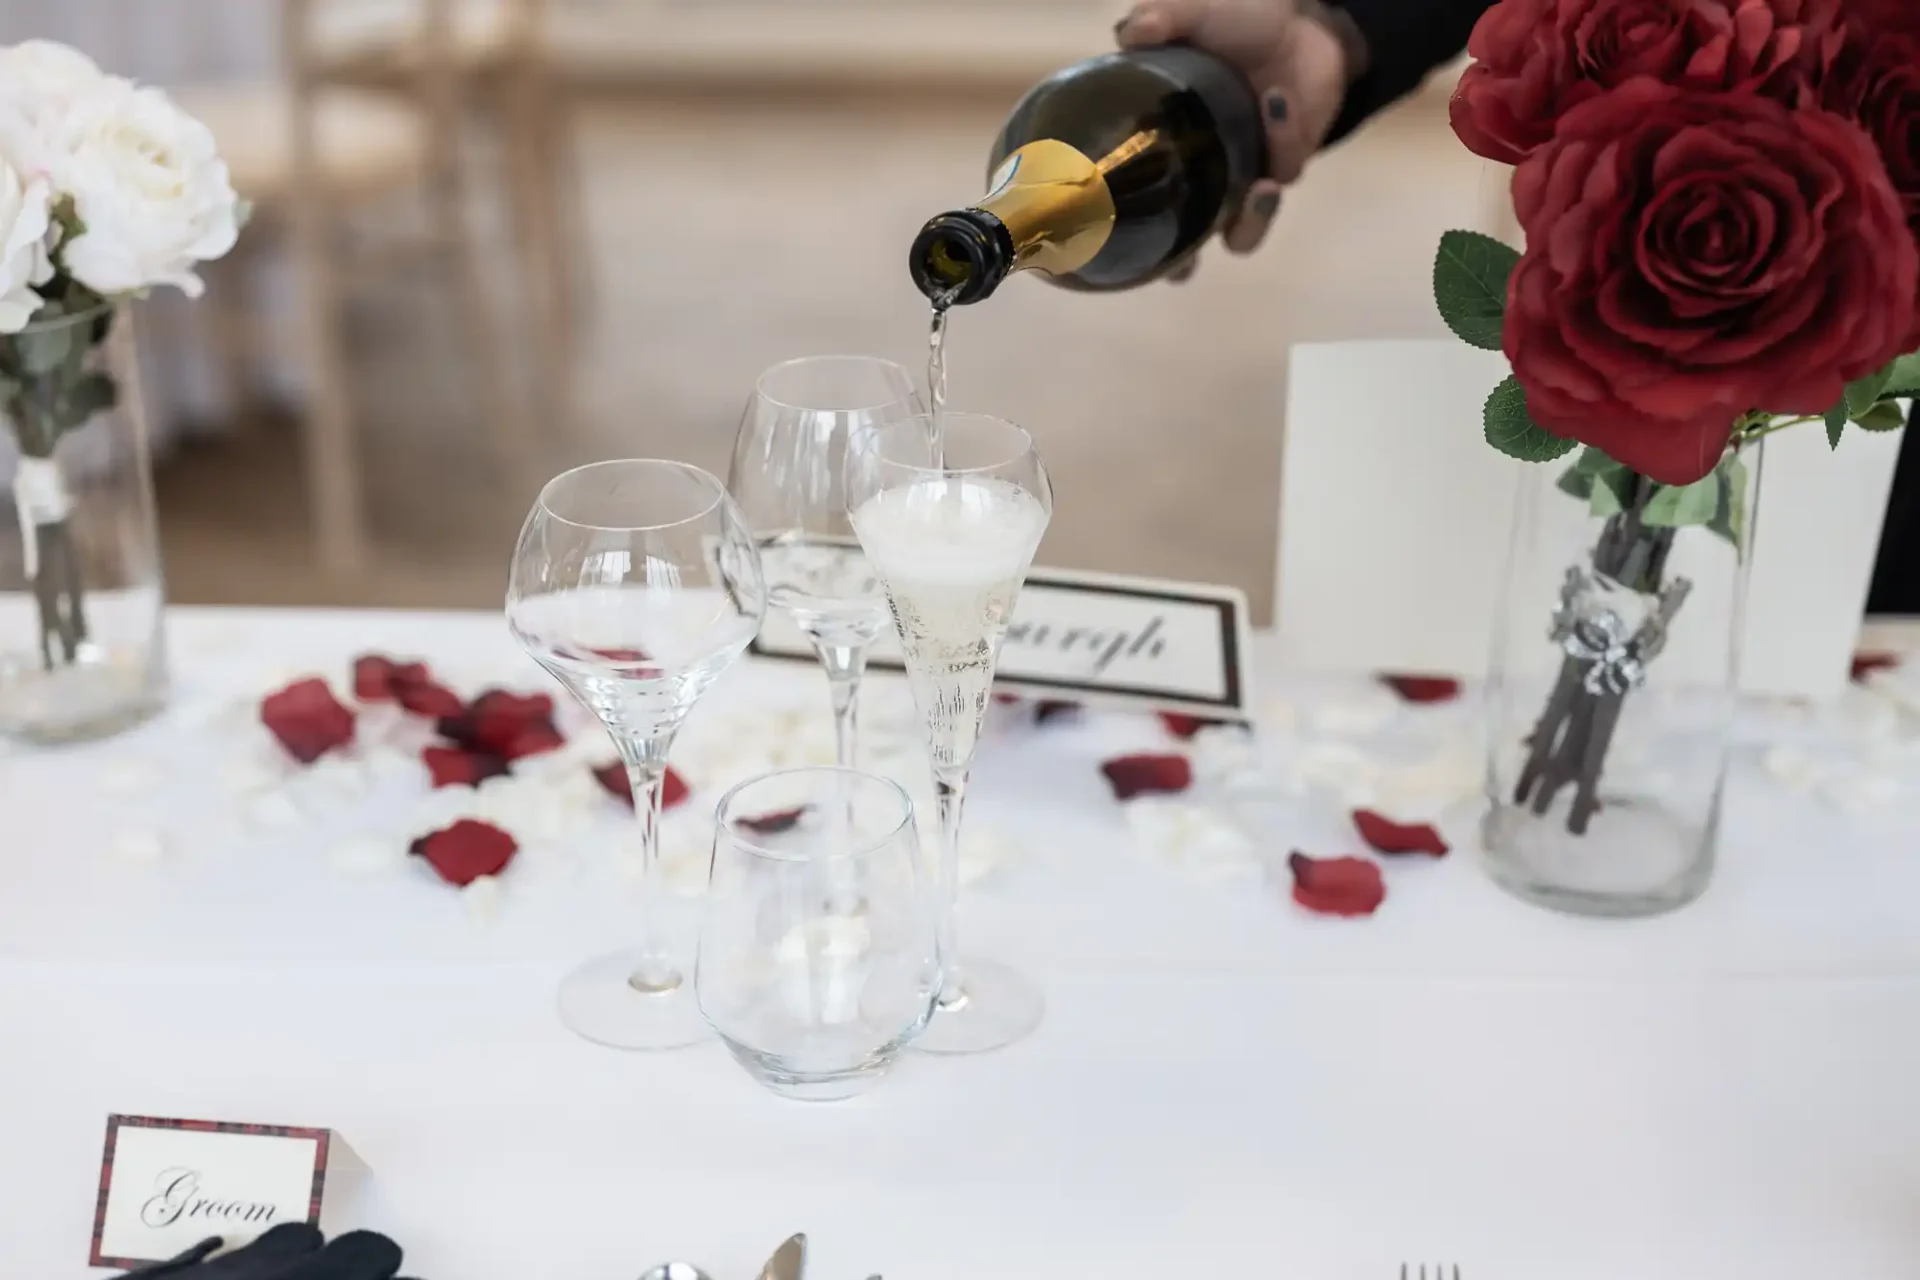 A hand pouring white wine into a tall glass at a formal dining table decorated with red roses and rose petals.